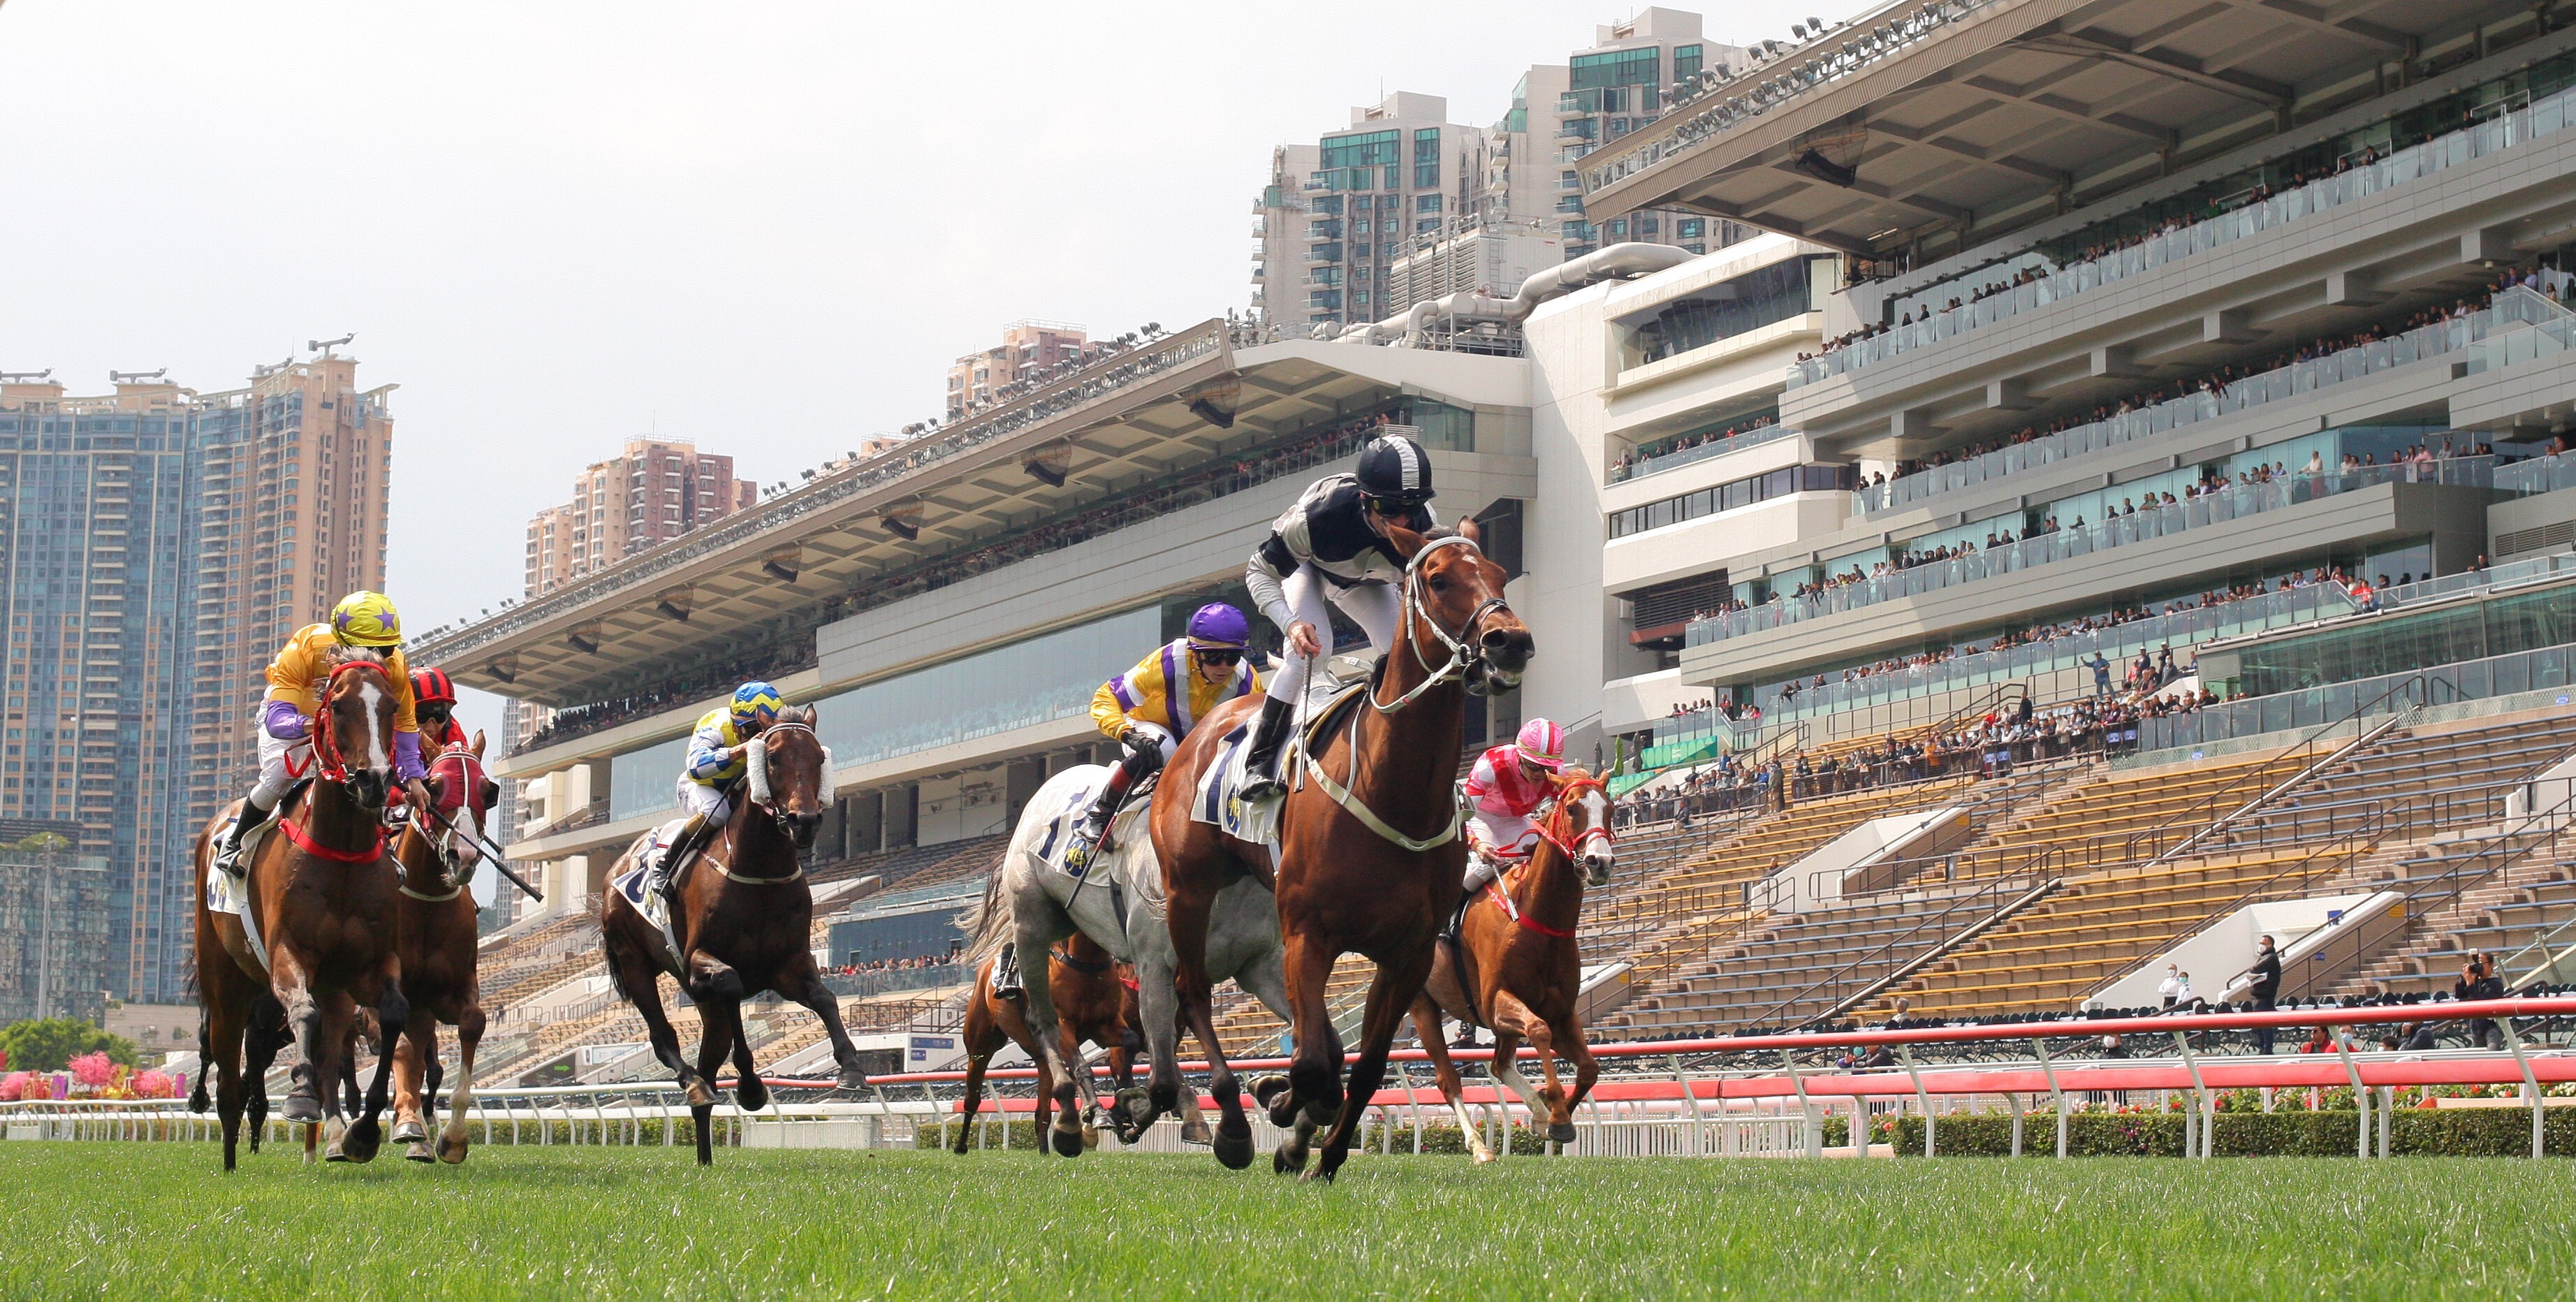 The Hong Kong Jockey Club has managed to continue horse races throughout the pandemic, providing a steady source of revenue to the government and to its charitable organisations. Photo: Kenneth Chan